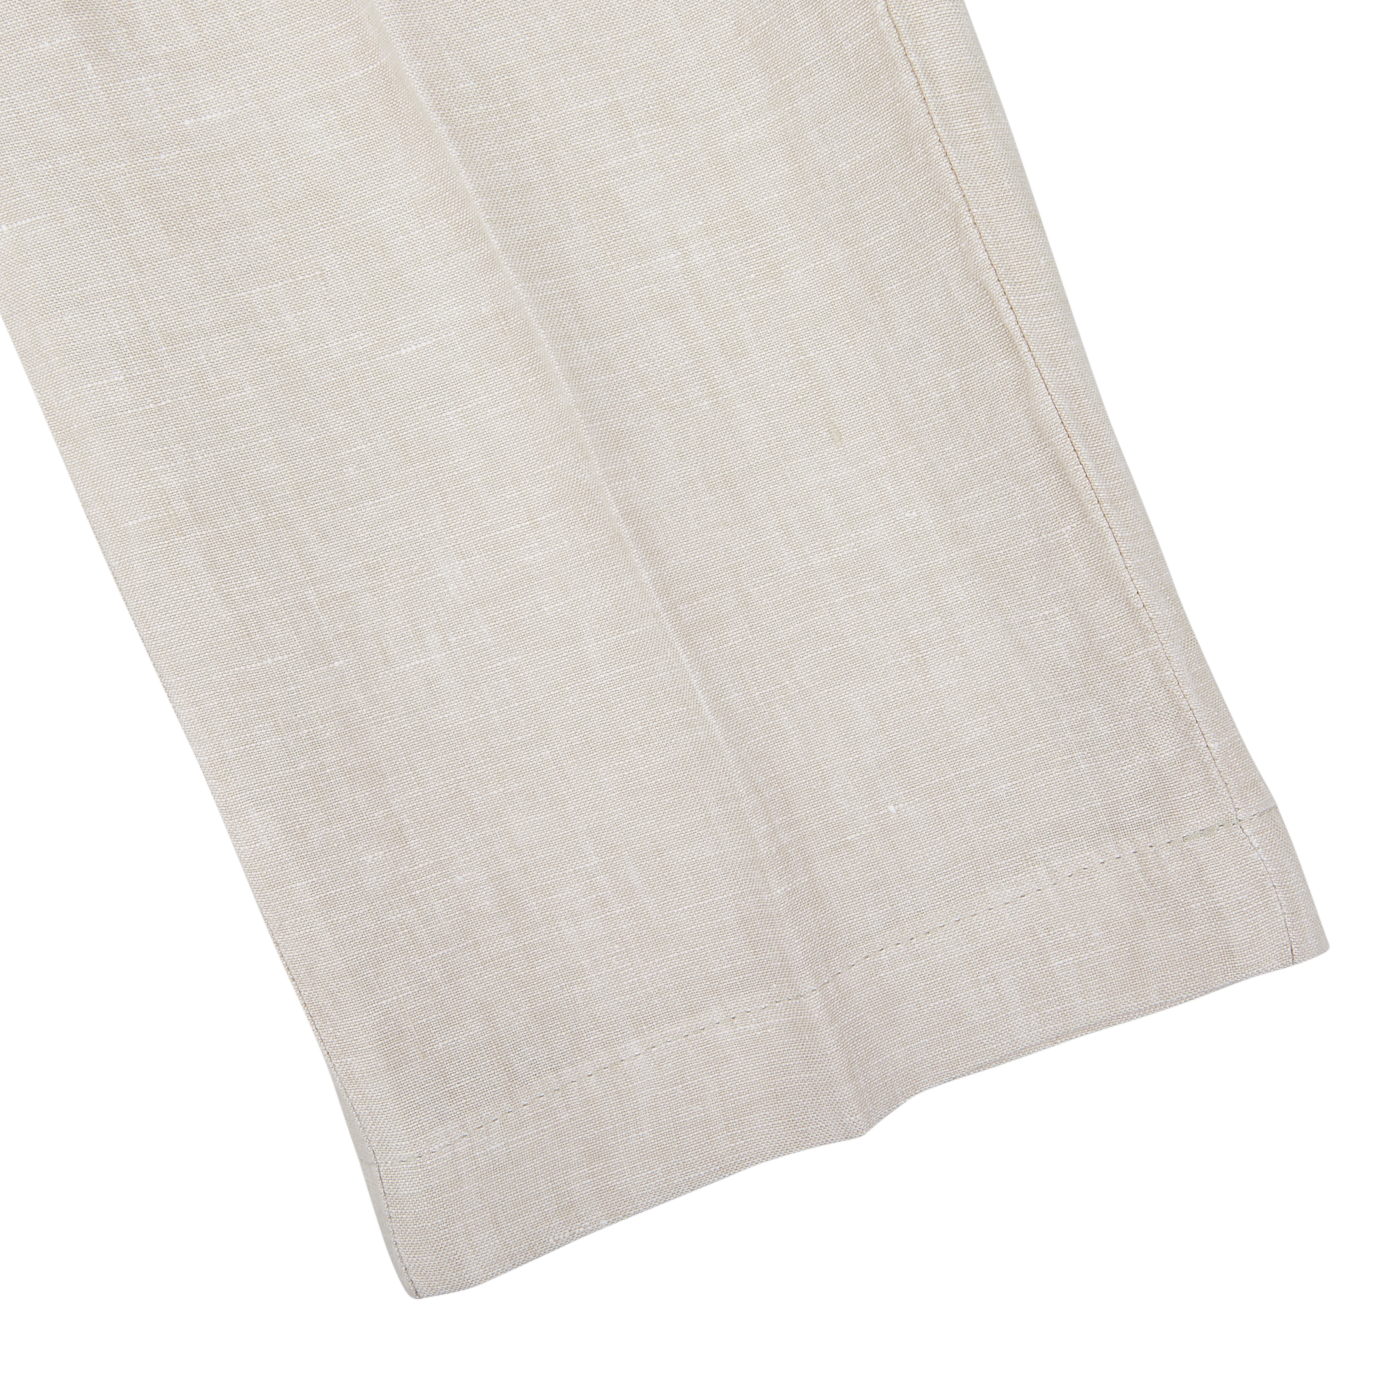 Close-up of a Hiltl light beige washed linen regular fit chinos with a subtle texture and visible weave, laid flat on a white background.